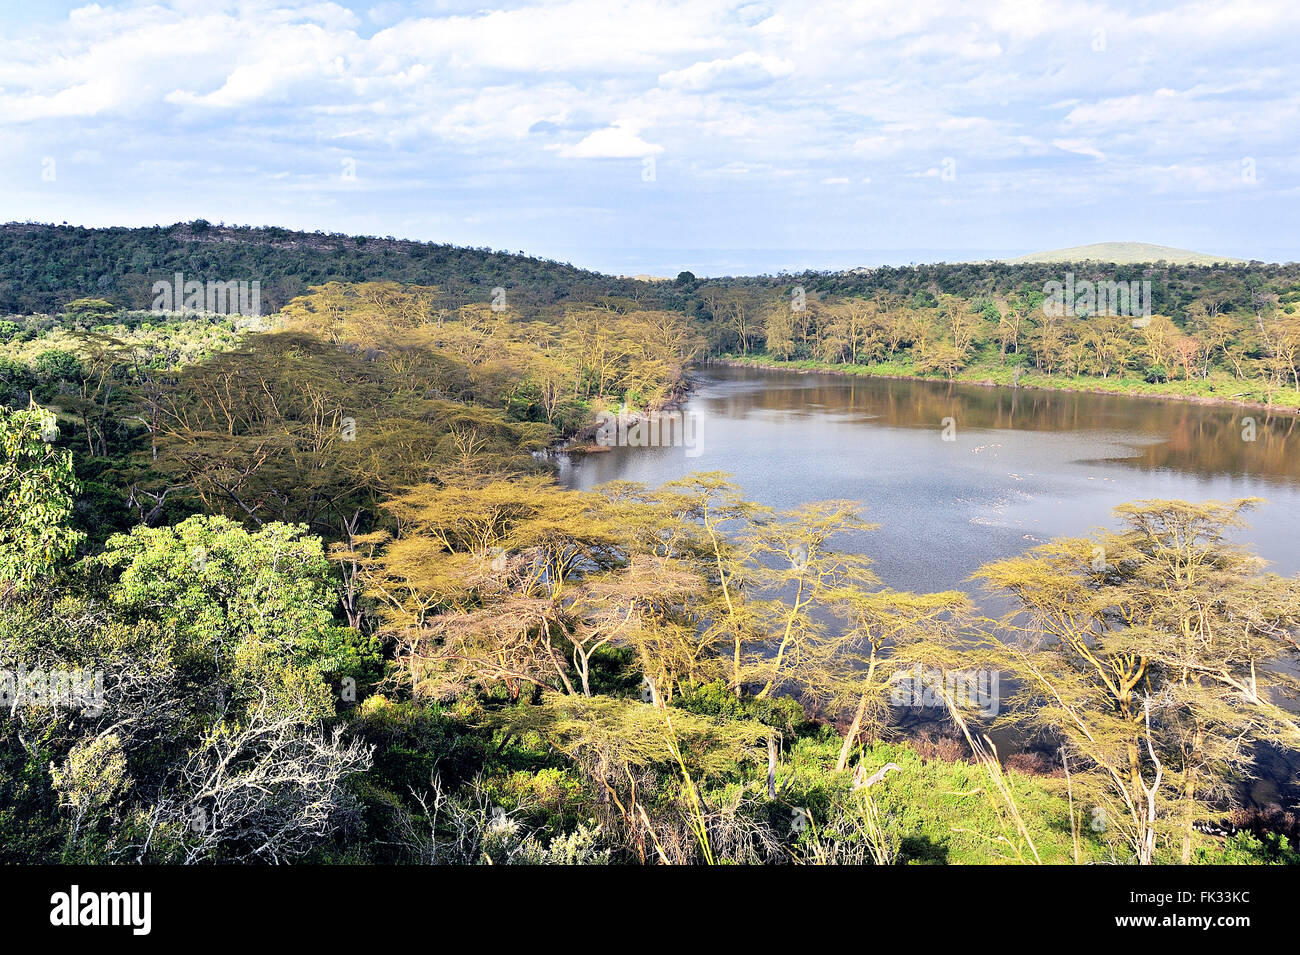 One of the numerous Crater Lakes in the Rift Valley of Kenya Stock Photo